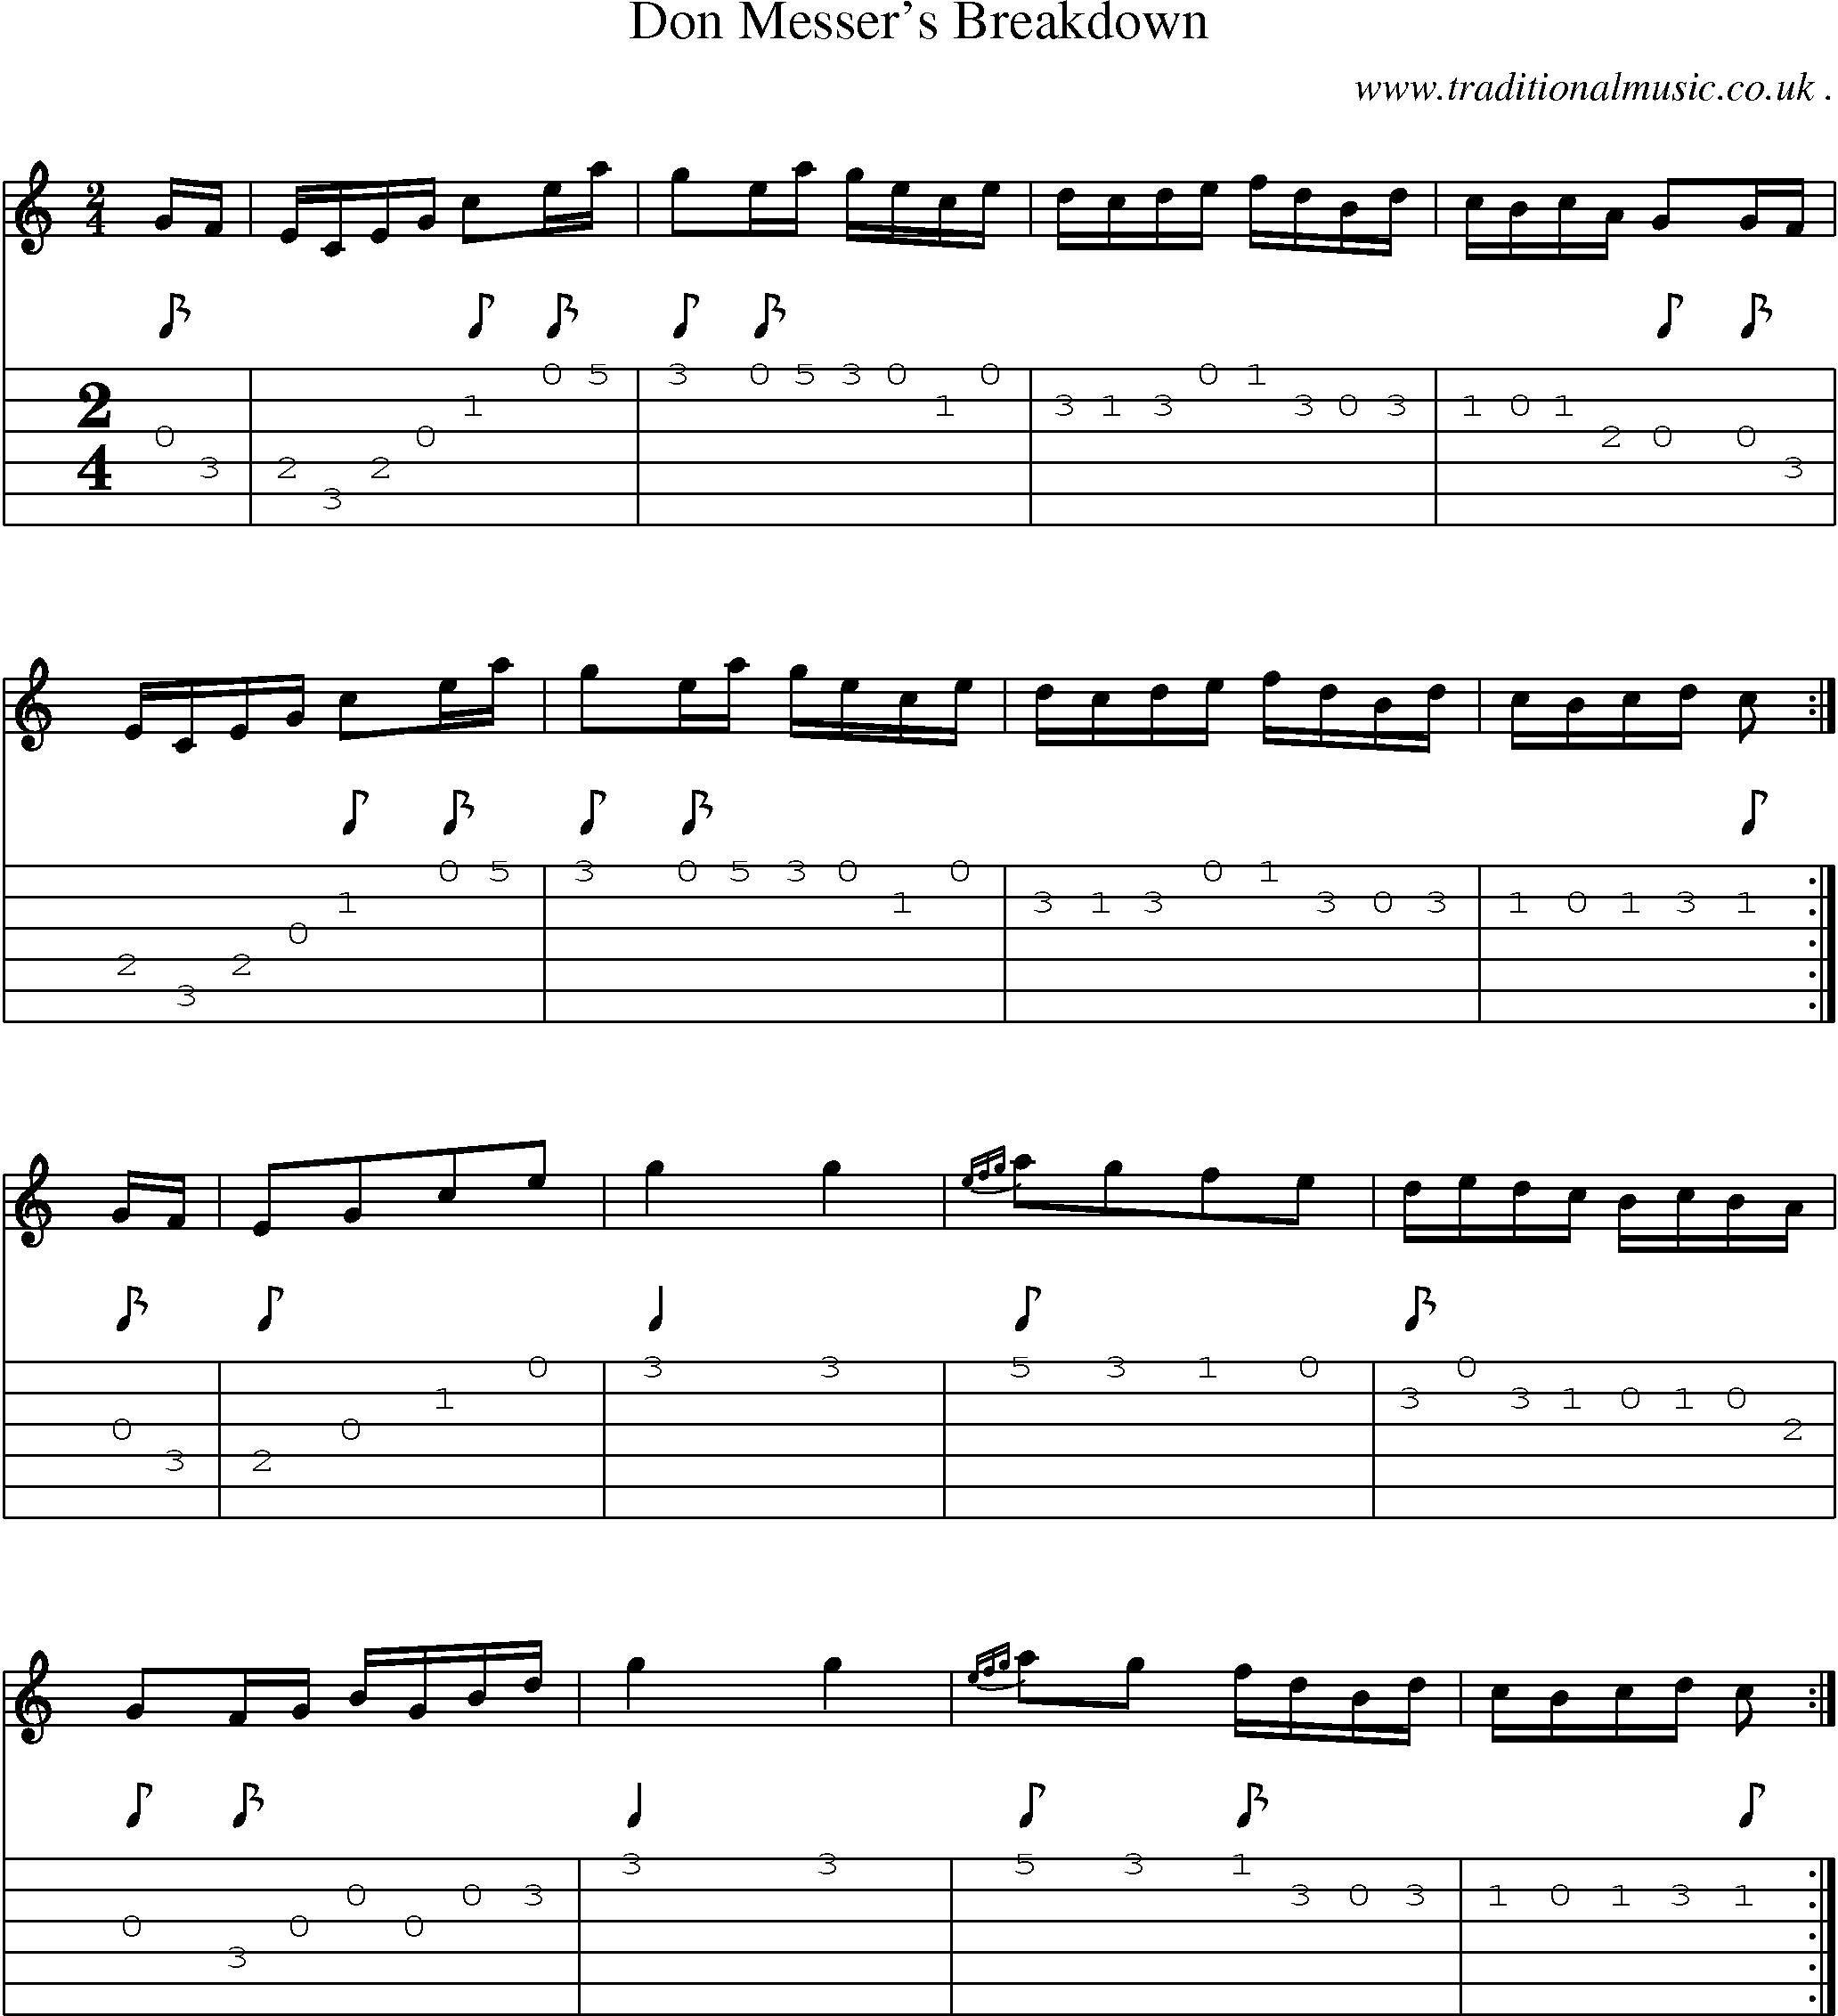 Music Score and Guitar Tabs for Don Messers Breakdown